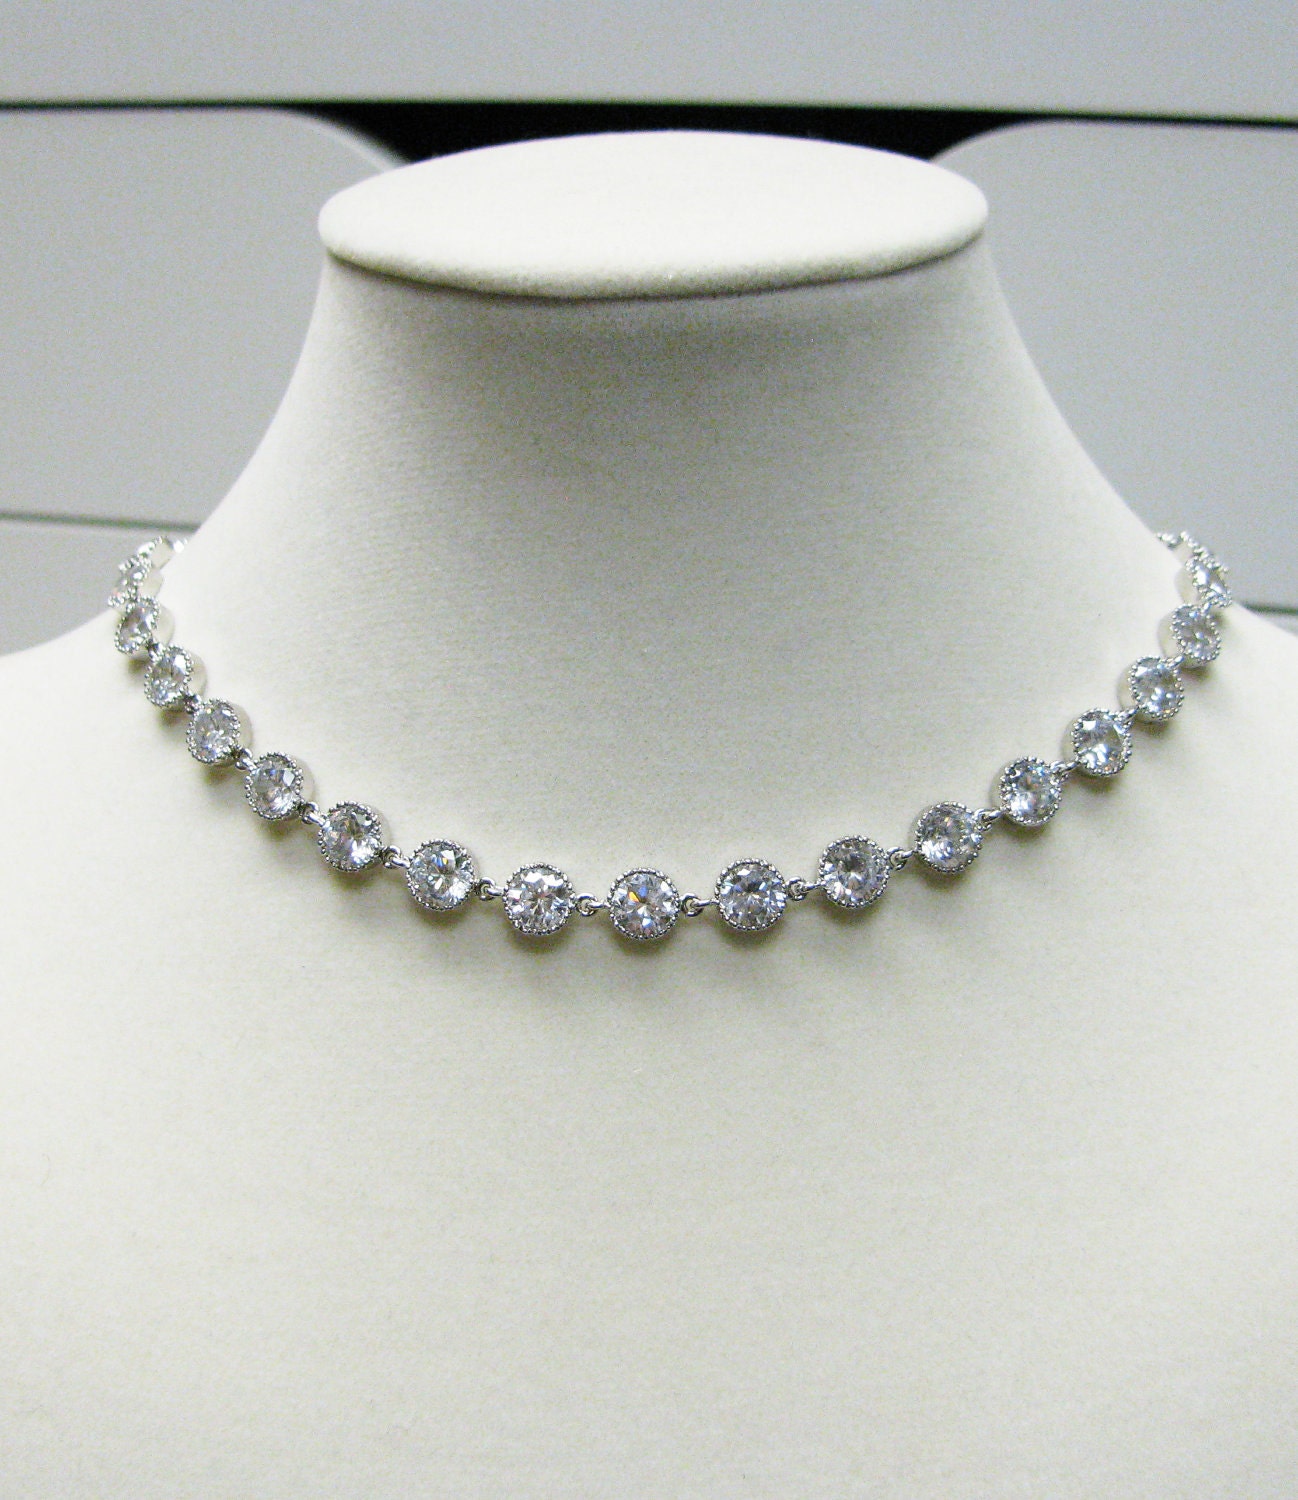 7mm round white gold platedAAA cubic zirconia choker necklace